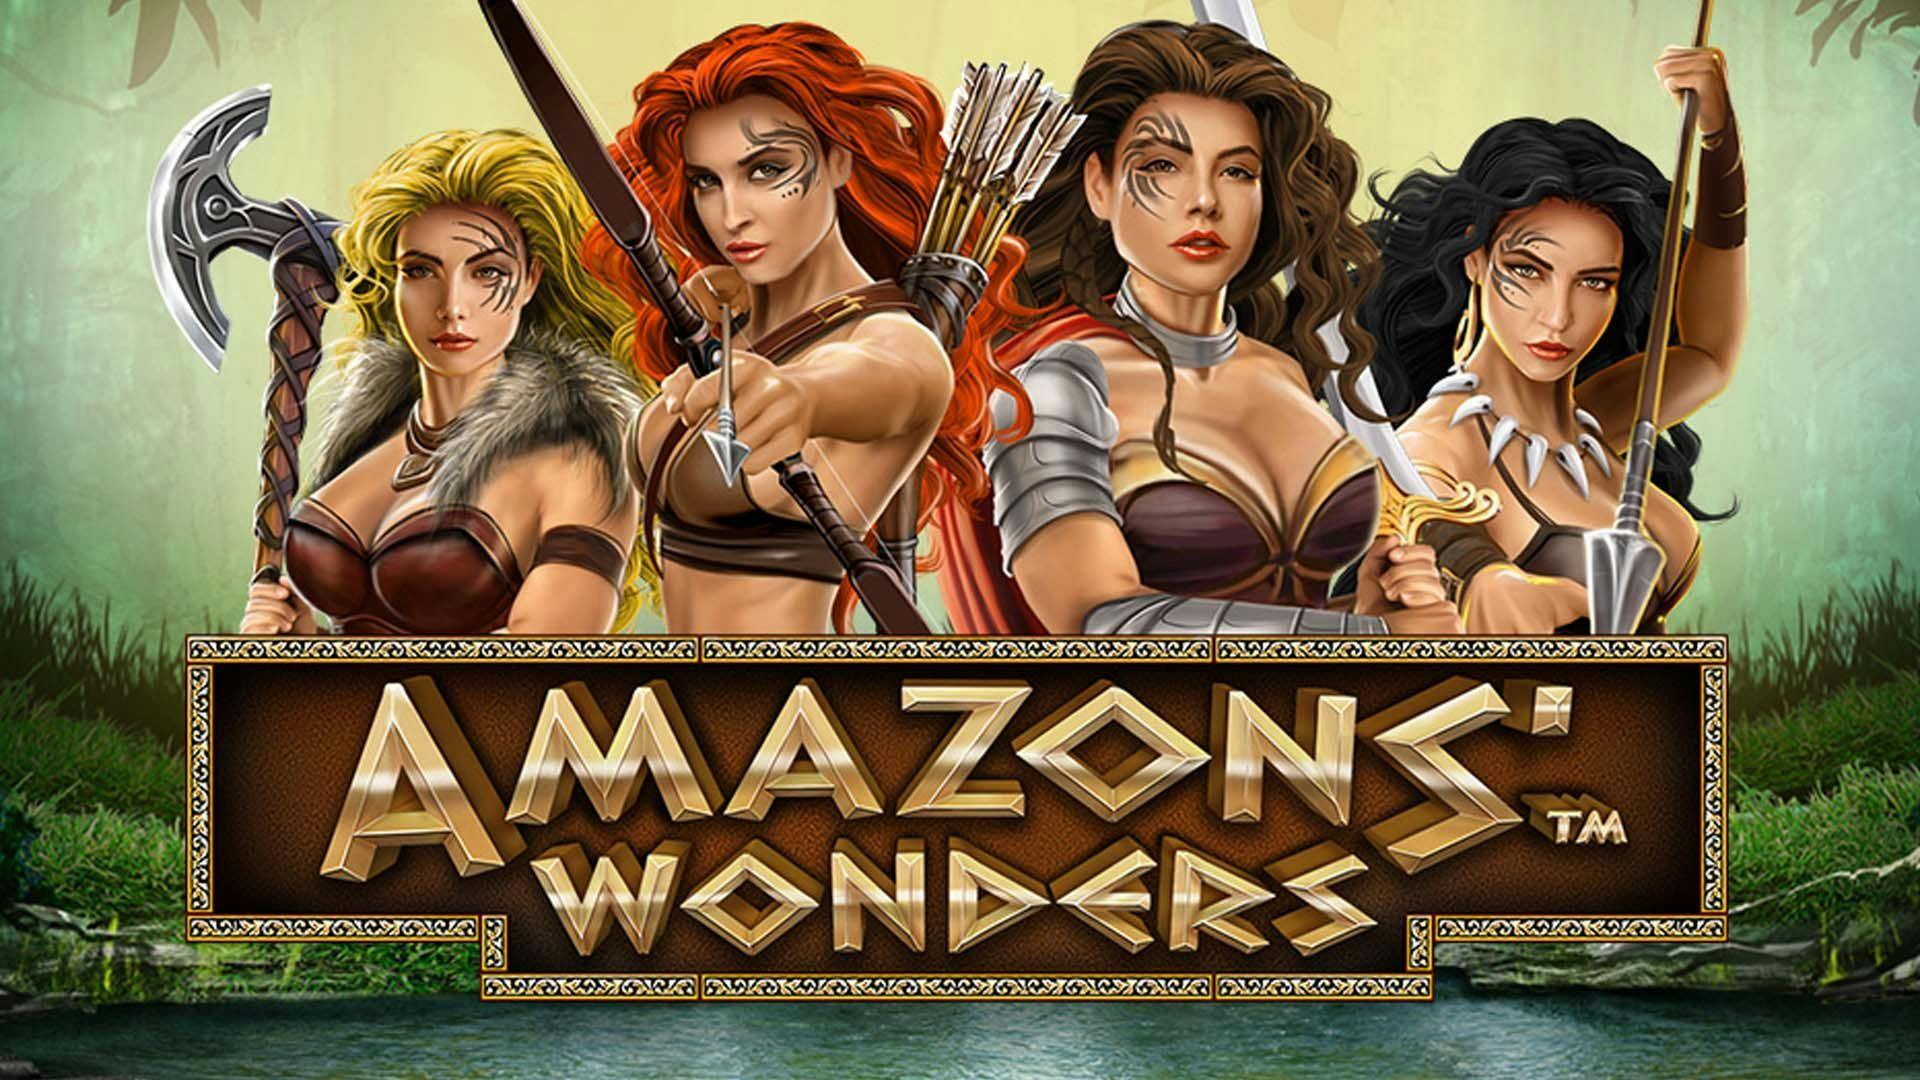 Amazons' Wonders Slot Online Free Game Play